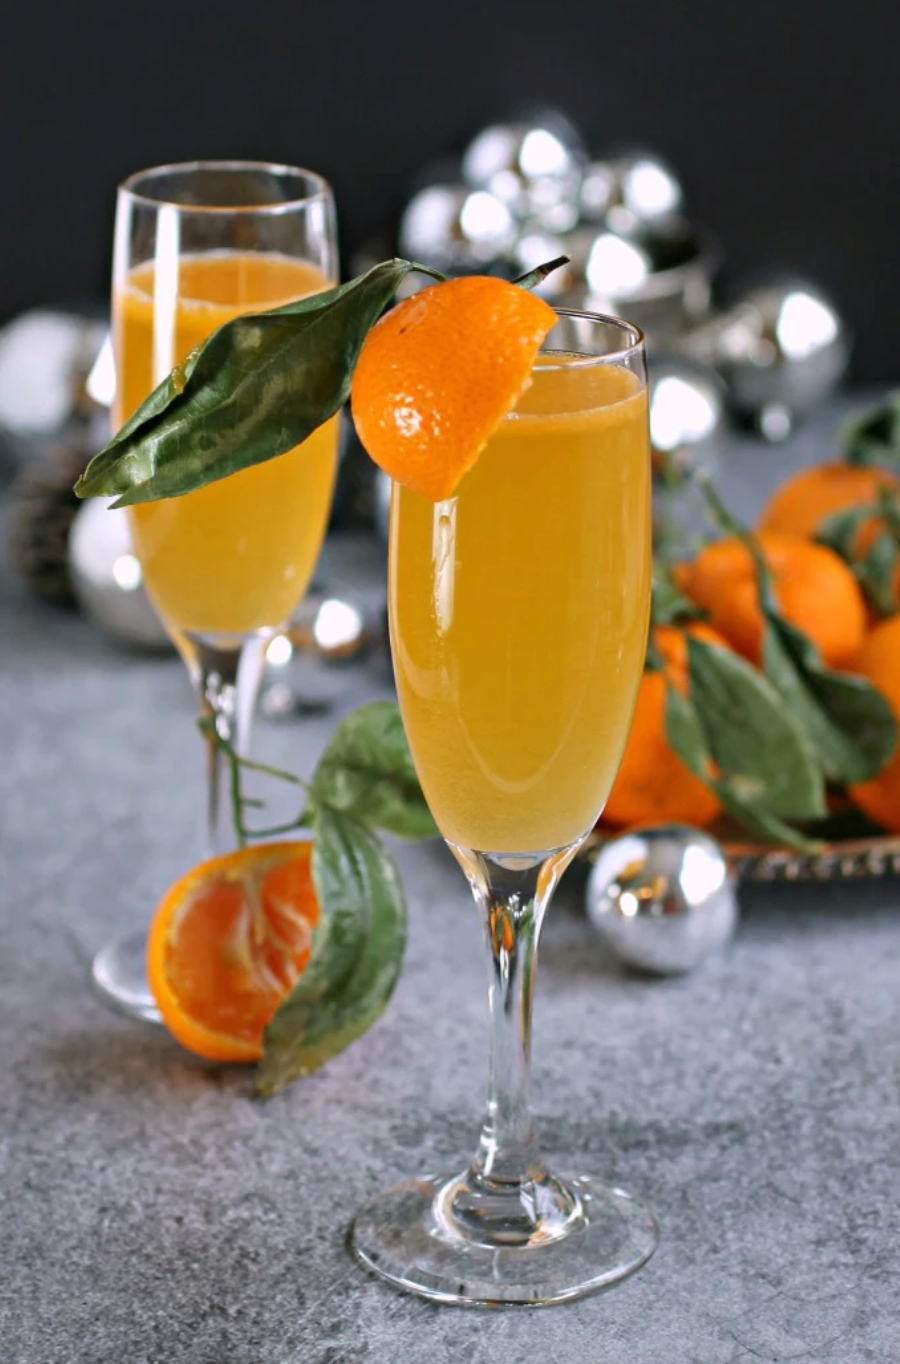 Two mimosas in champagne glasses with orange wedges. Oranges with their leaves left on sit in the background.